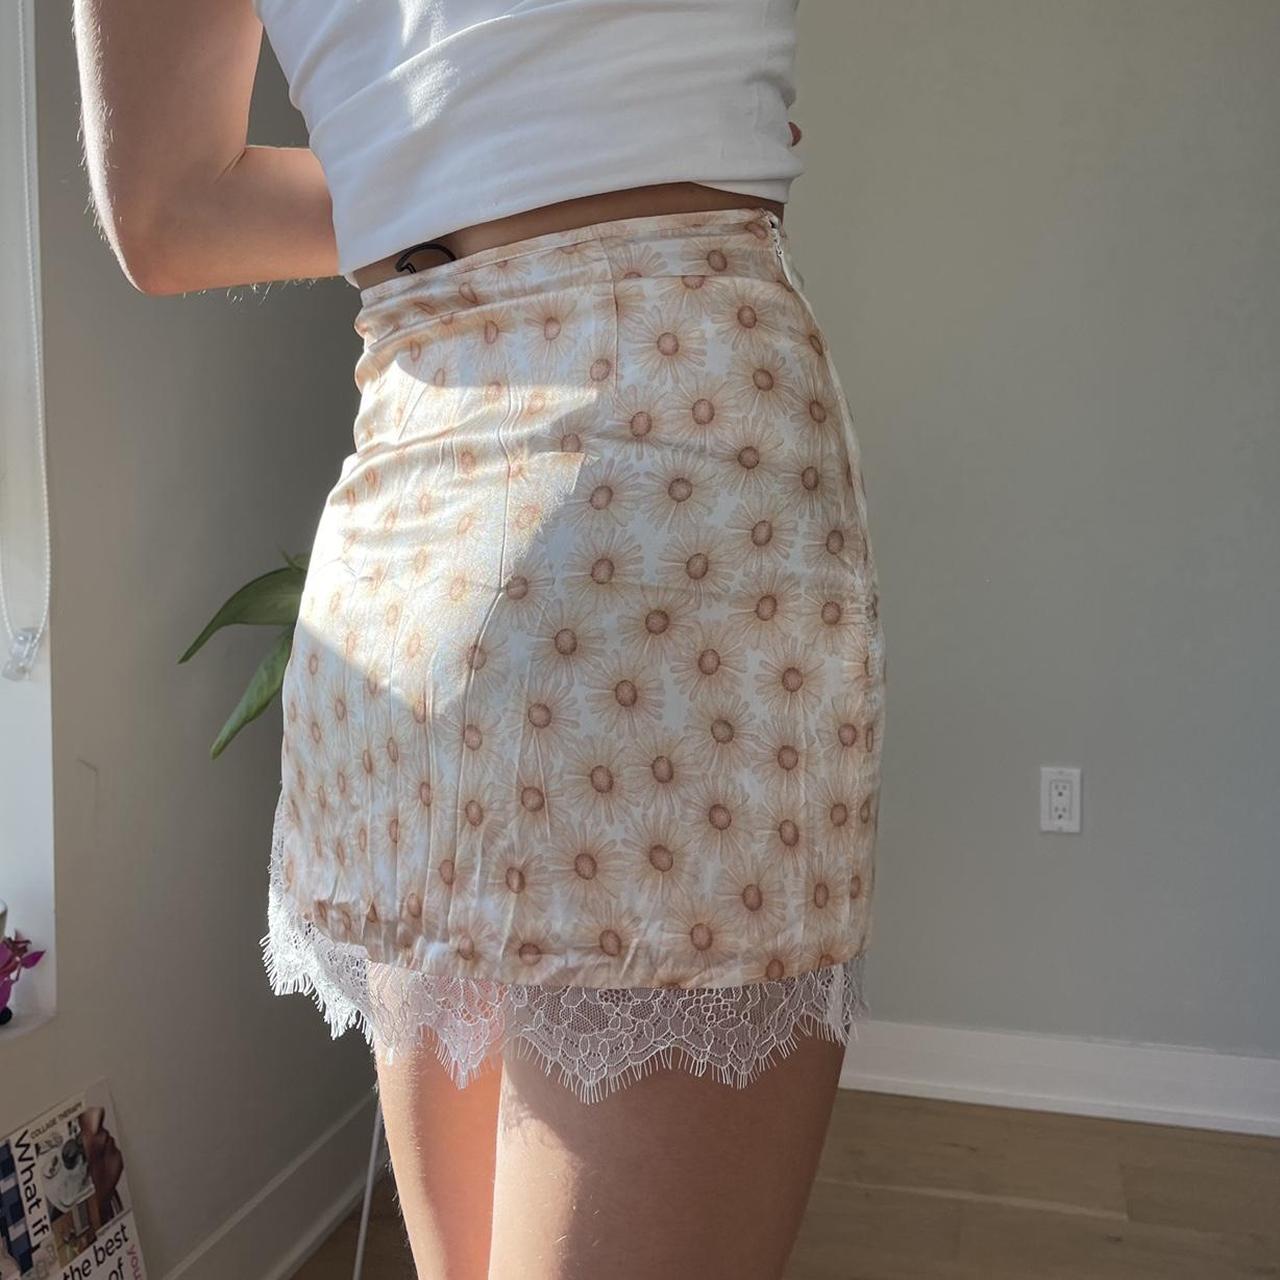 Product Image 2 - SUNFLOWER SKIRT WITH LACE TRIM
•